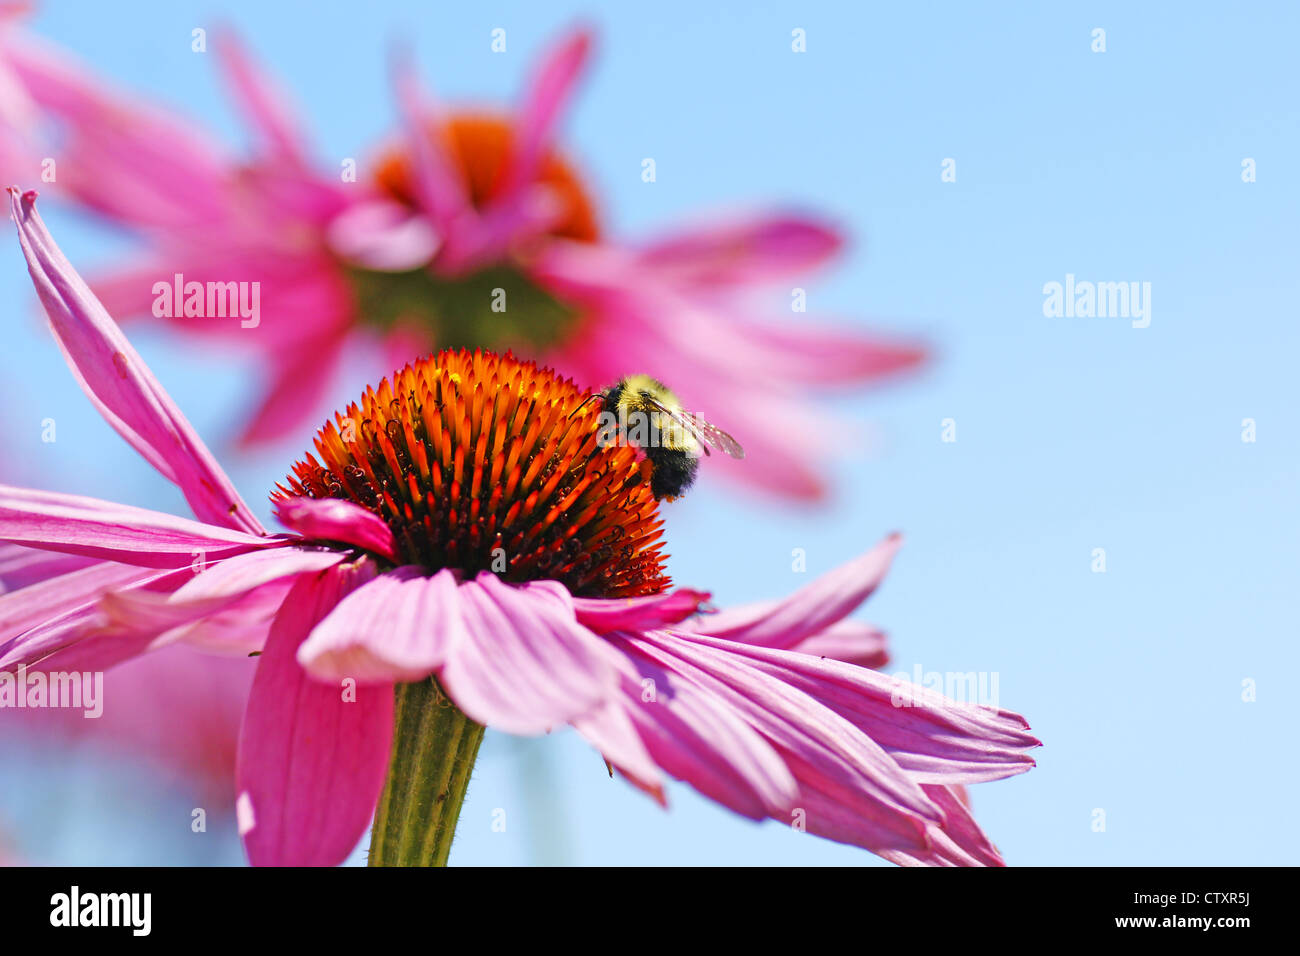 Perfect nature floral background or wallpaper with bumblebee drinking nectar of pretty pink coneflower, Echinacea purpurea again Stock Photo